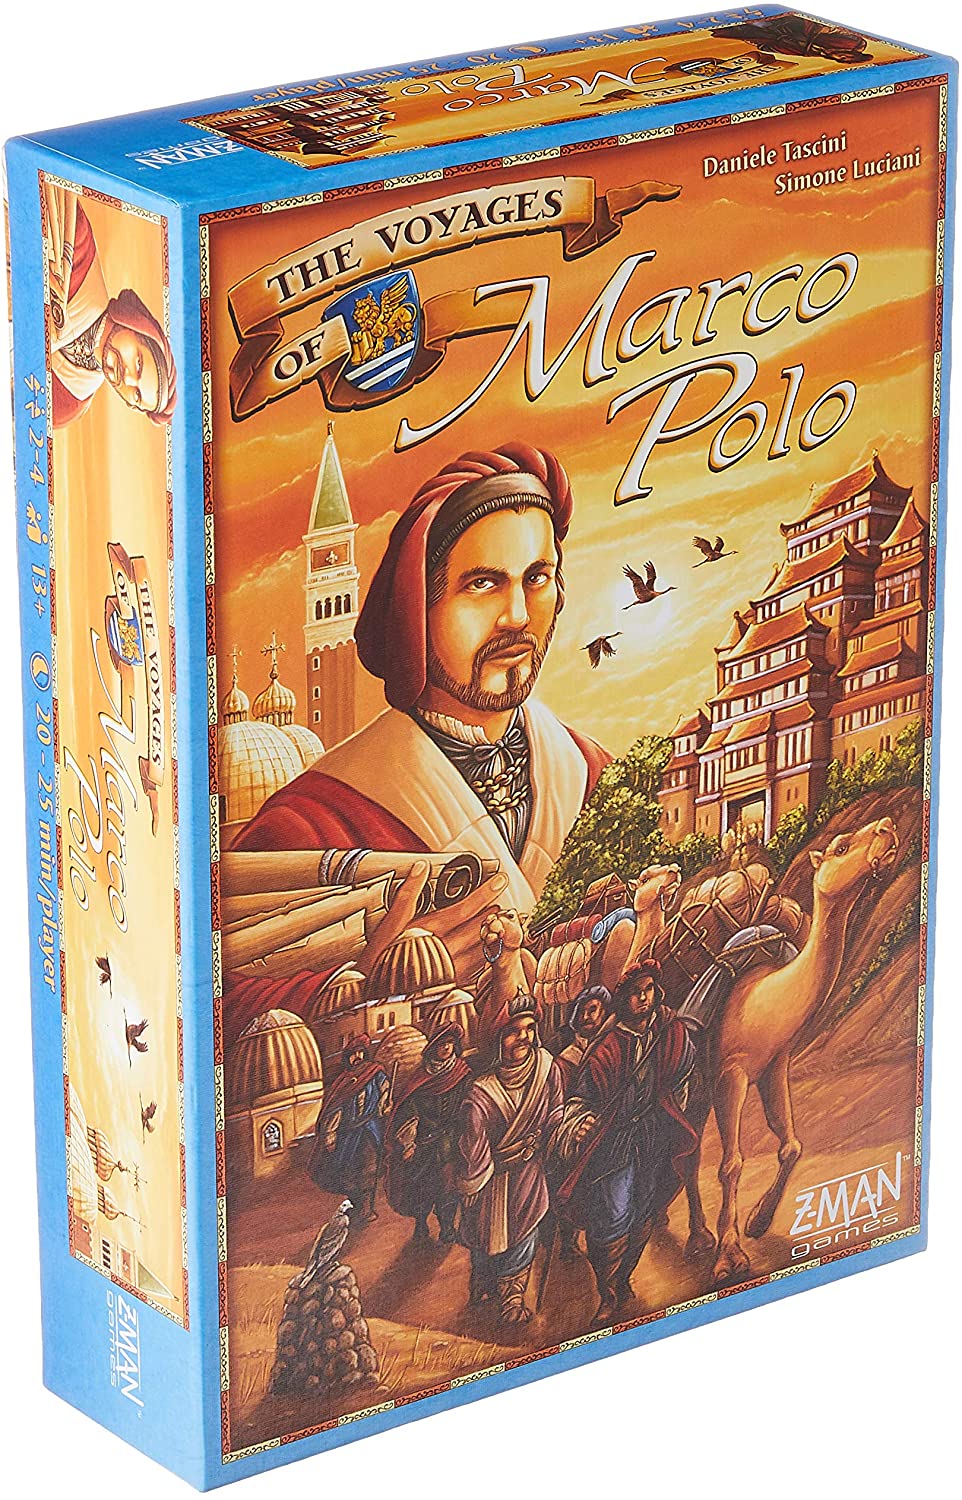 (BSG Certified USED) The Voyages of Marco Polo